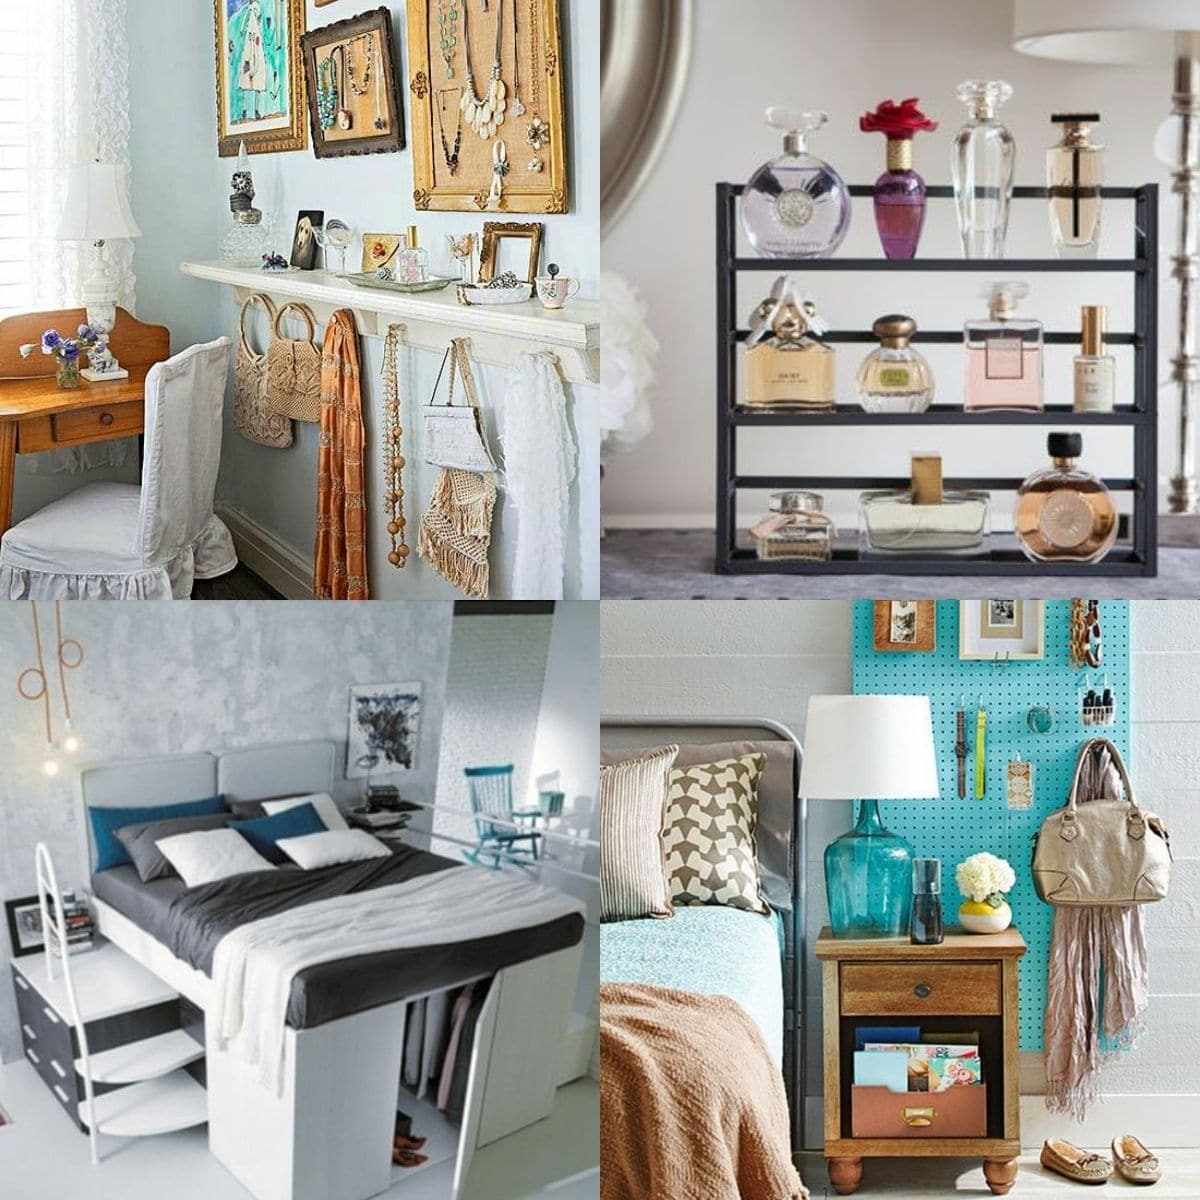 Increase storage in your small rooms with the fun hacks.

Keep your room both organized and stylish. 😉

#Storage #StorageIDeas #StorageSpace #SmallRooms #SmallRoomStorage #SmallRoomStorageIDeas
 #HomeSoldByDawn
 LocalInfoForYou.com/140243/small-r…